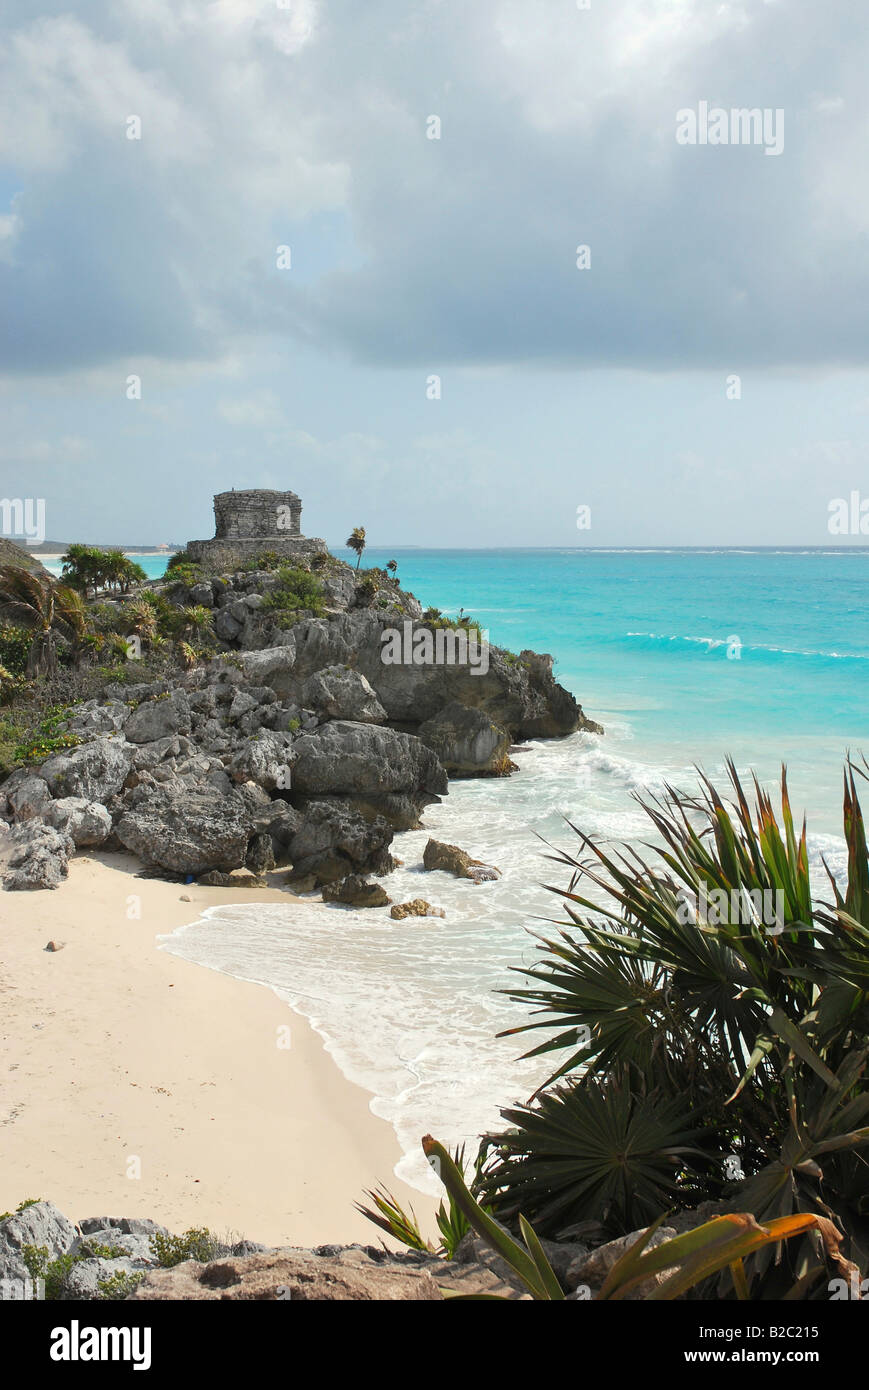 Templo del Viento, Temple of the Wind, Tulum, Mayan archaeological excavation, , Yucatan Peninsula, Mexico, Central America Stock Photo